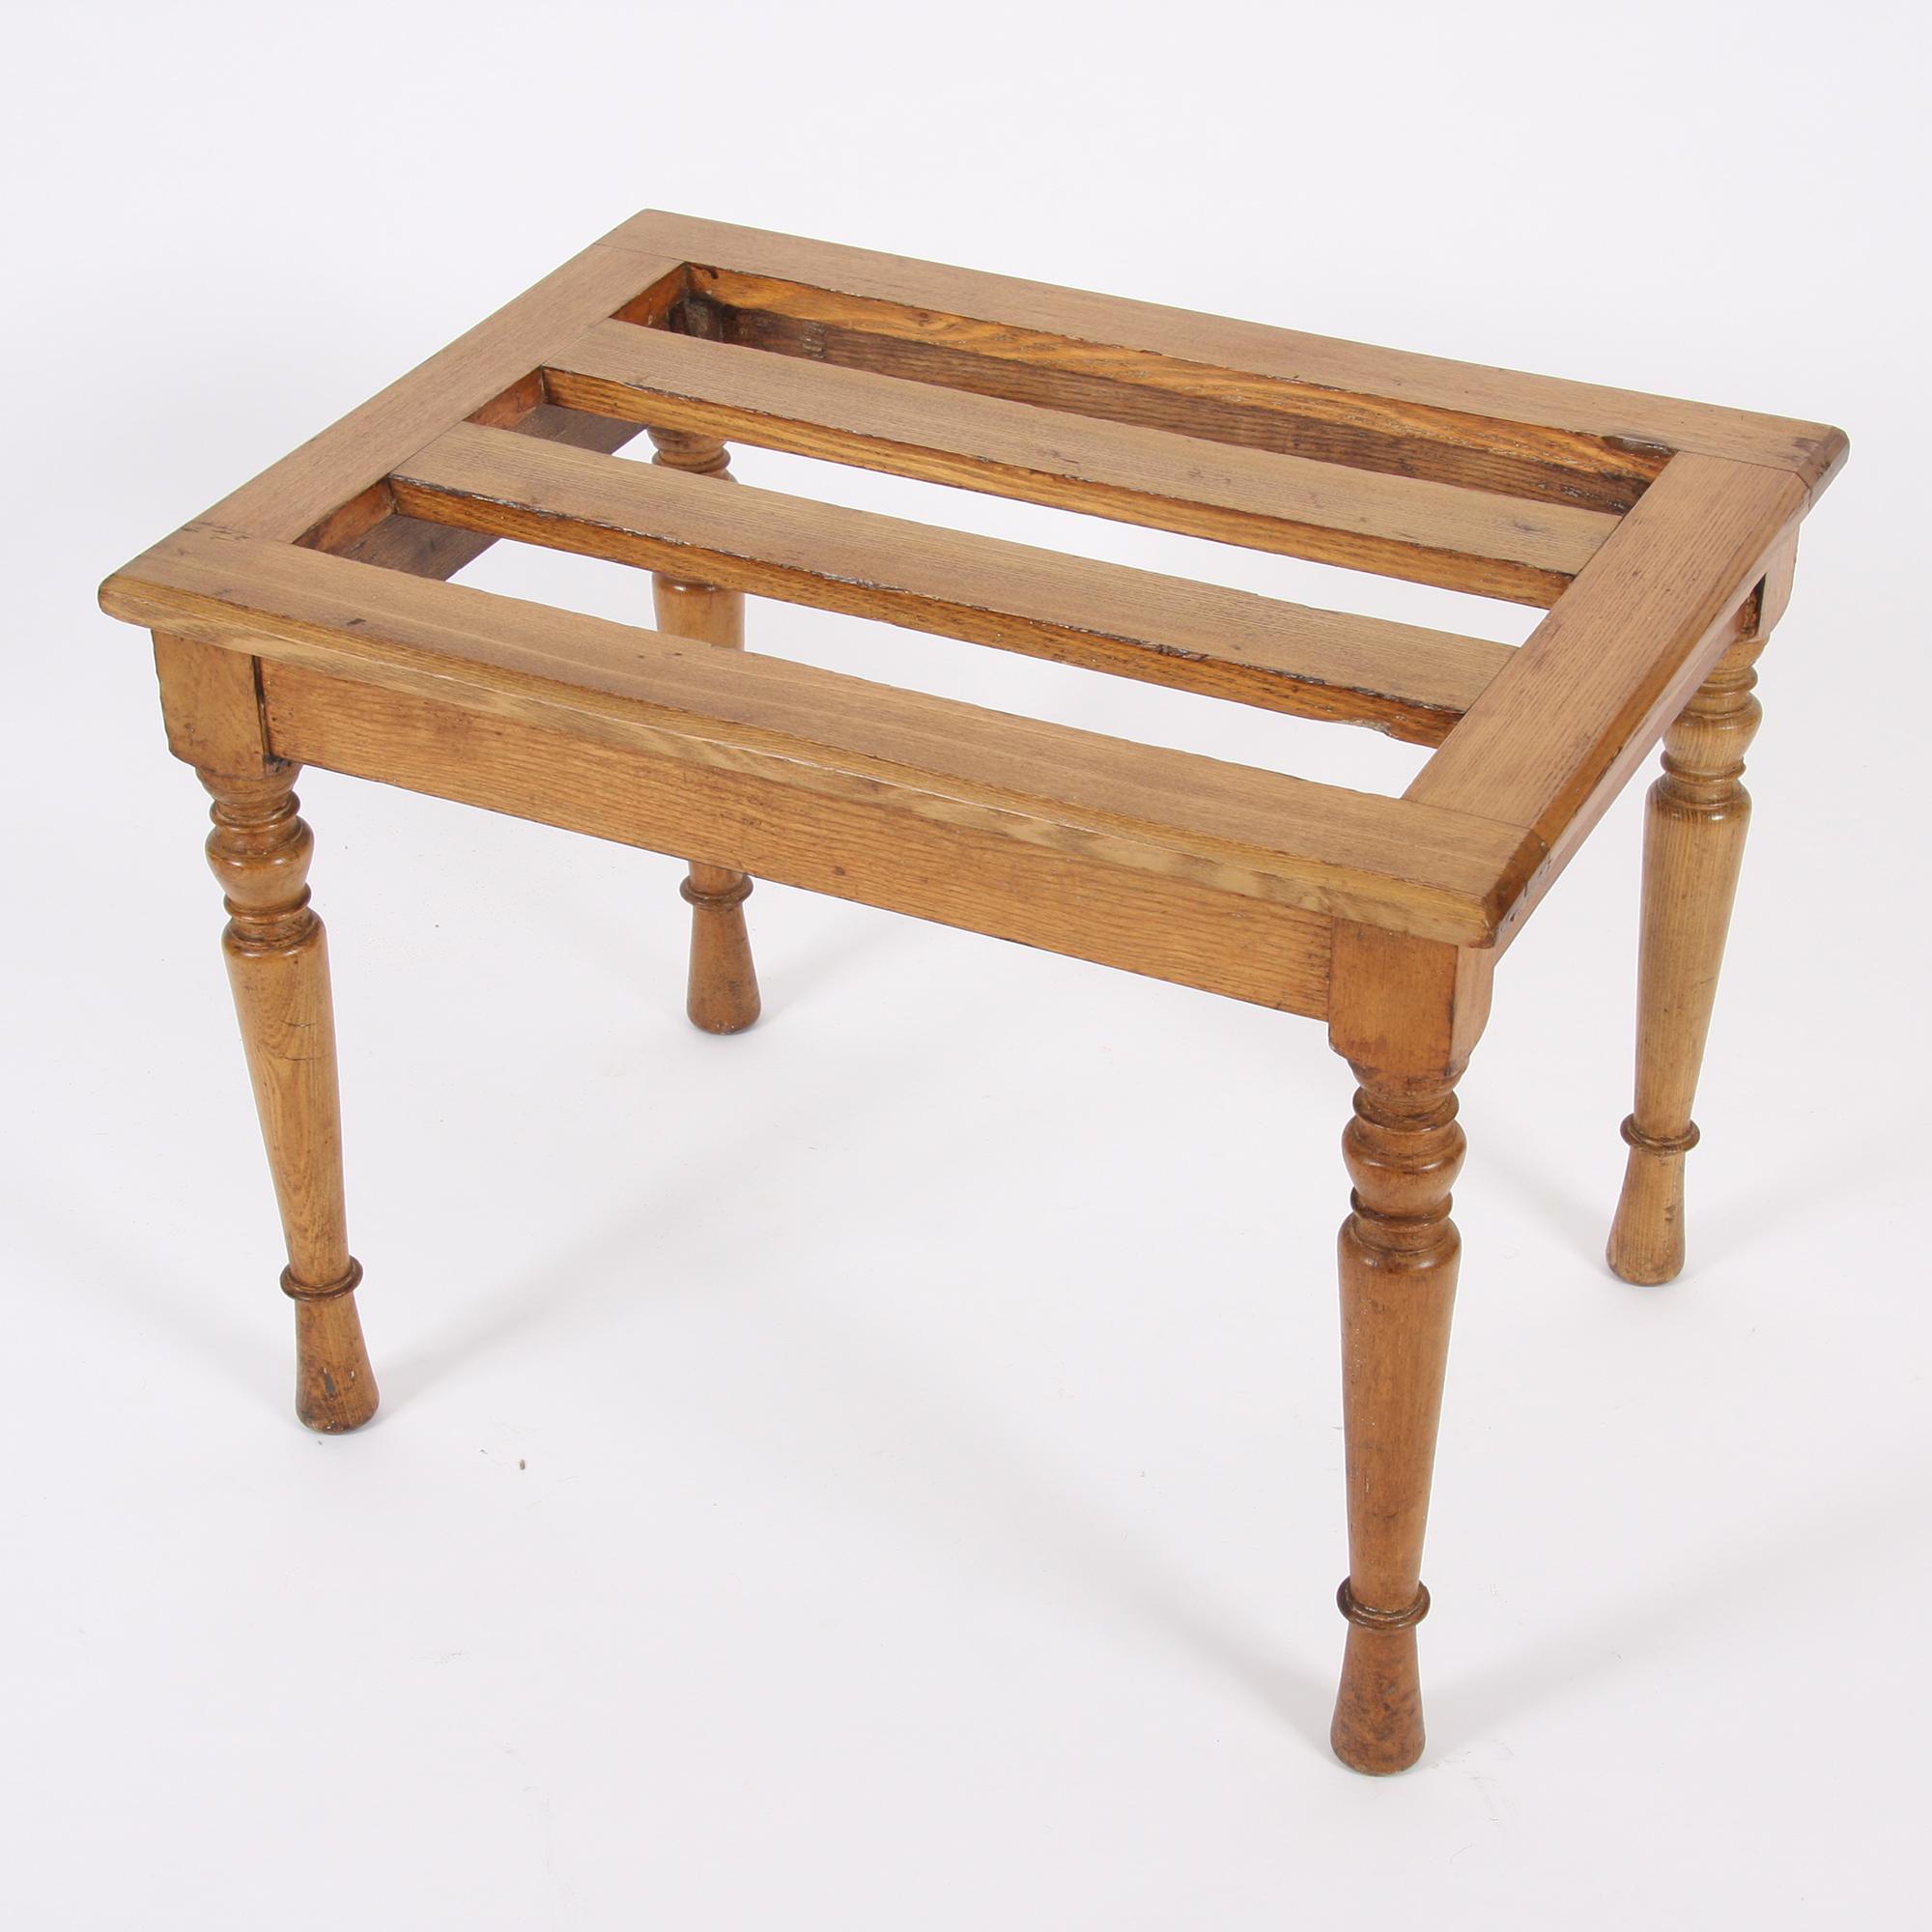 This beautiful wooden luggage rack dates back to early 20th century, England.